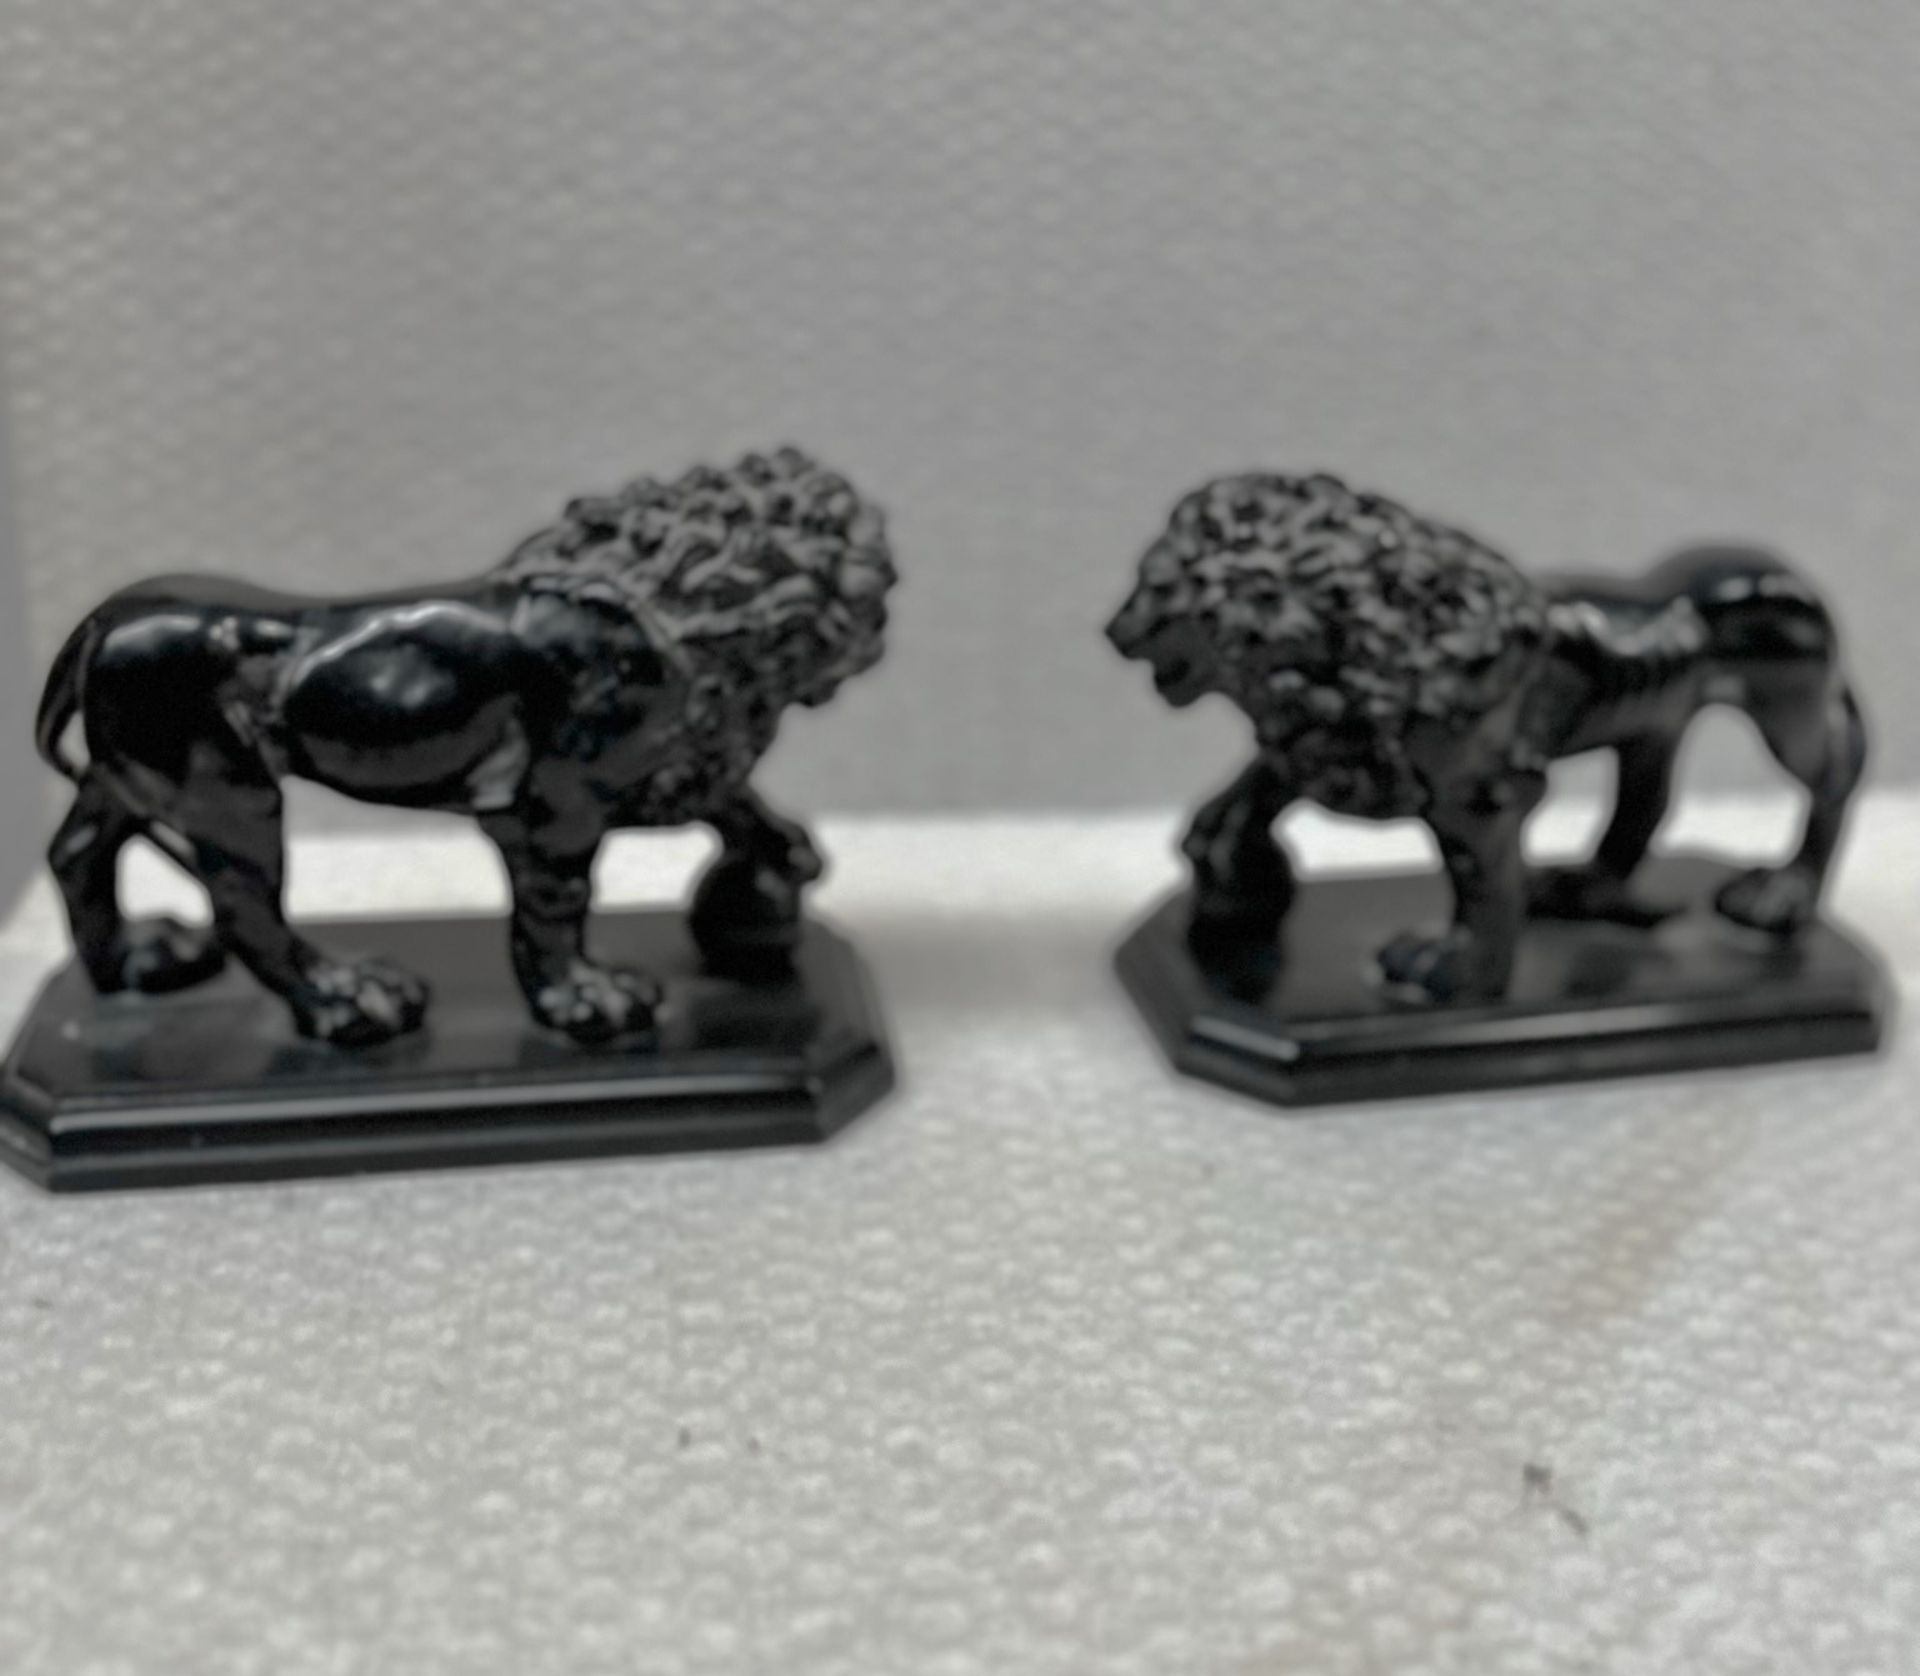 2 x Black Sleeping Lions Resin Bookends - Image 3 of 3